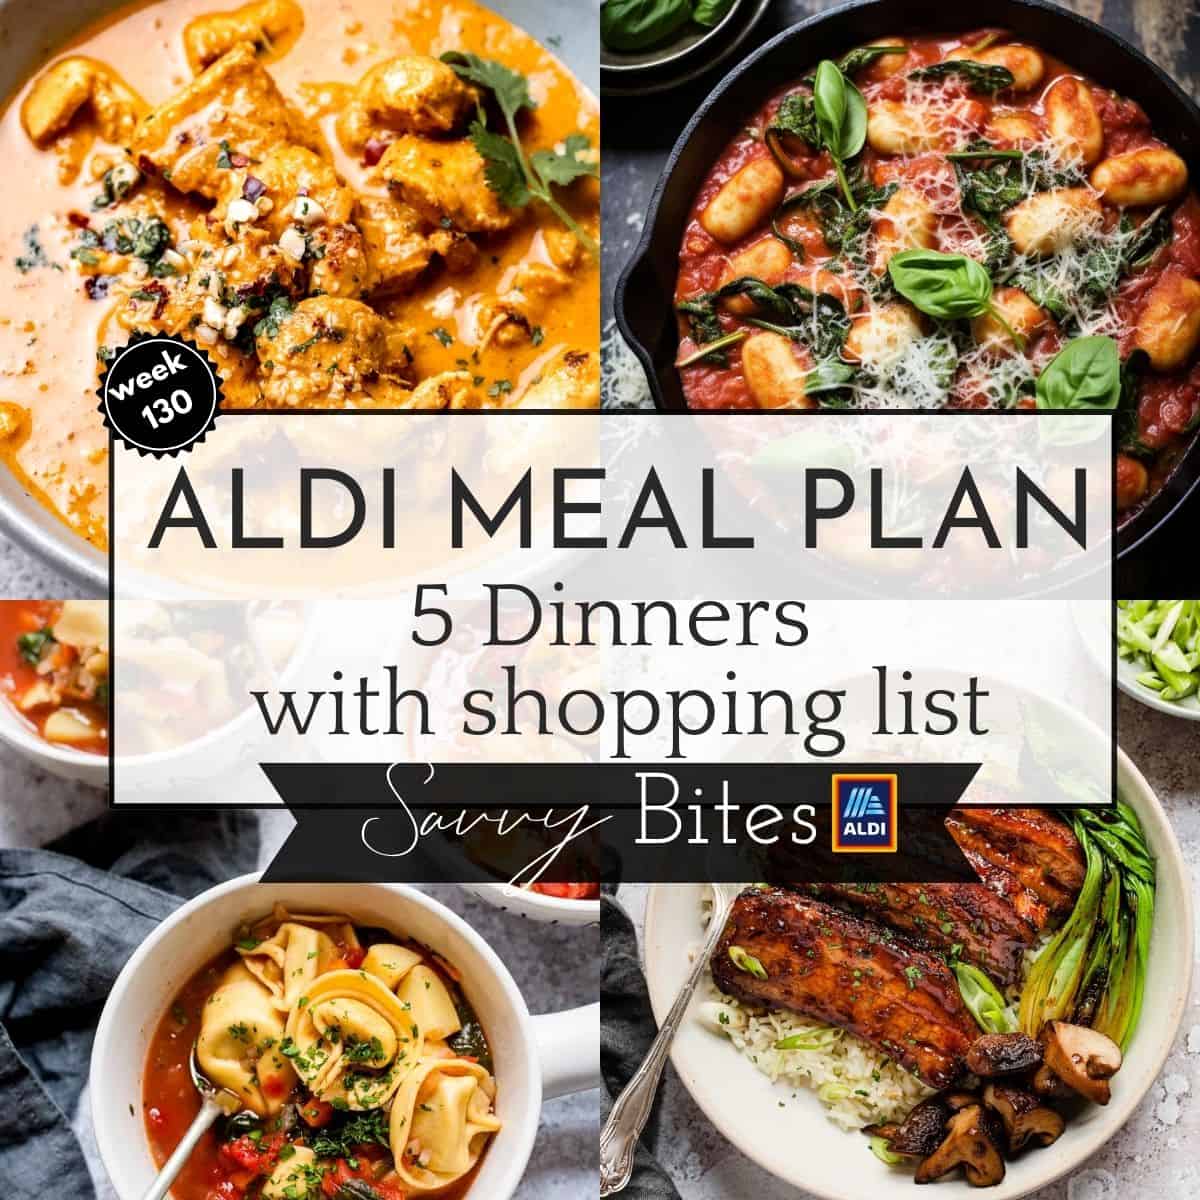 Family budget meal plan full of easy dinners. Photo collage.